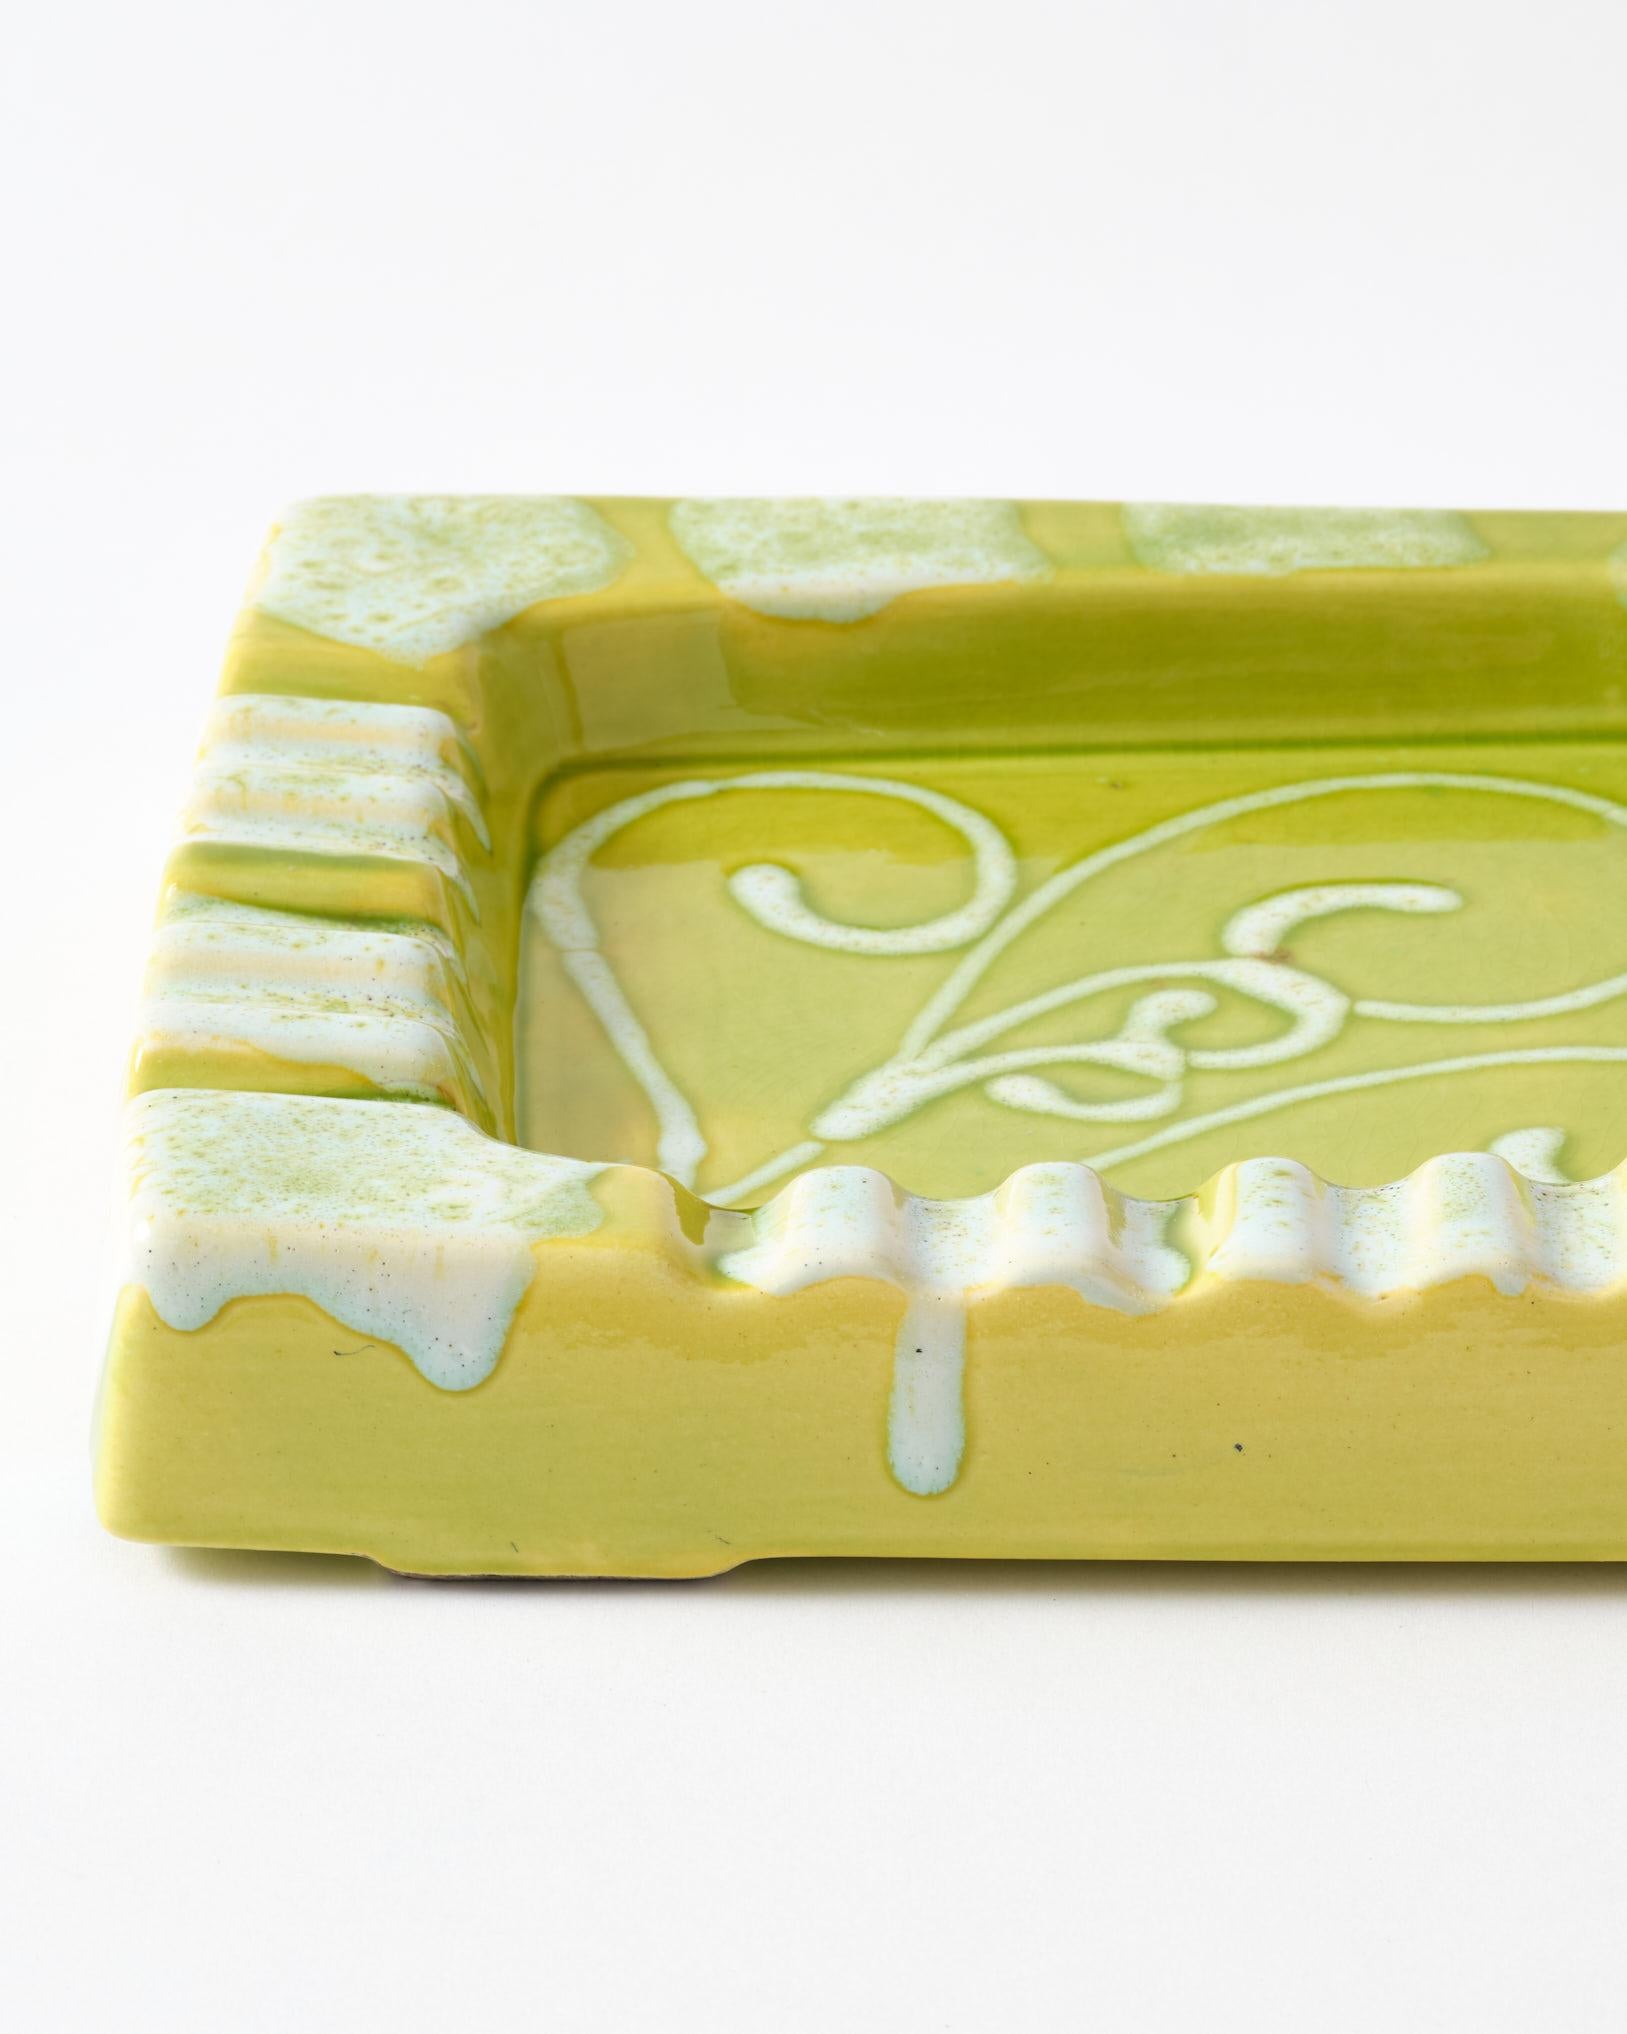 Ceramic Ashtray, Lime Green With White Details, Italy, C 1950, Vintage Ashtray For Sale 5